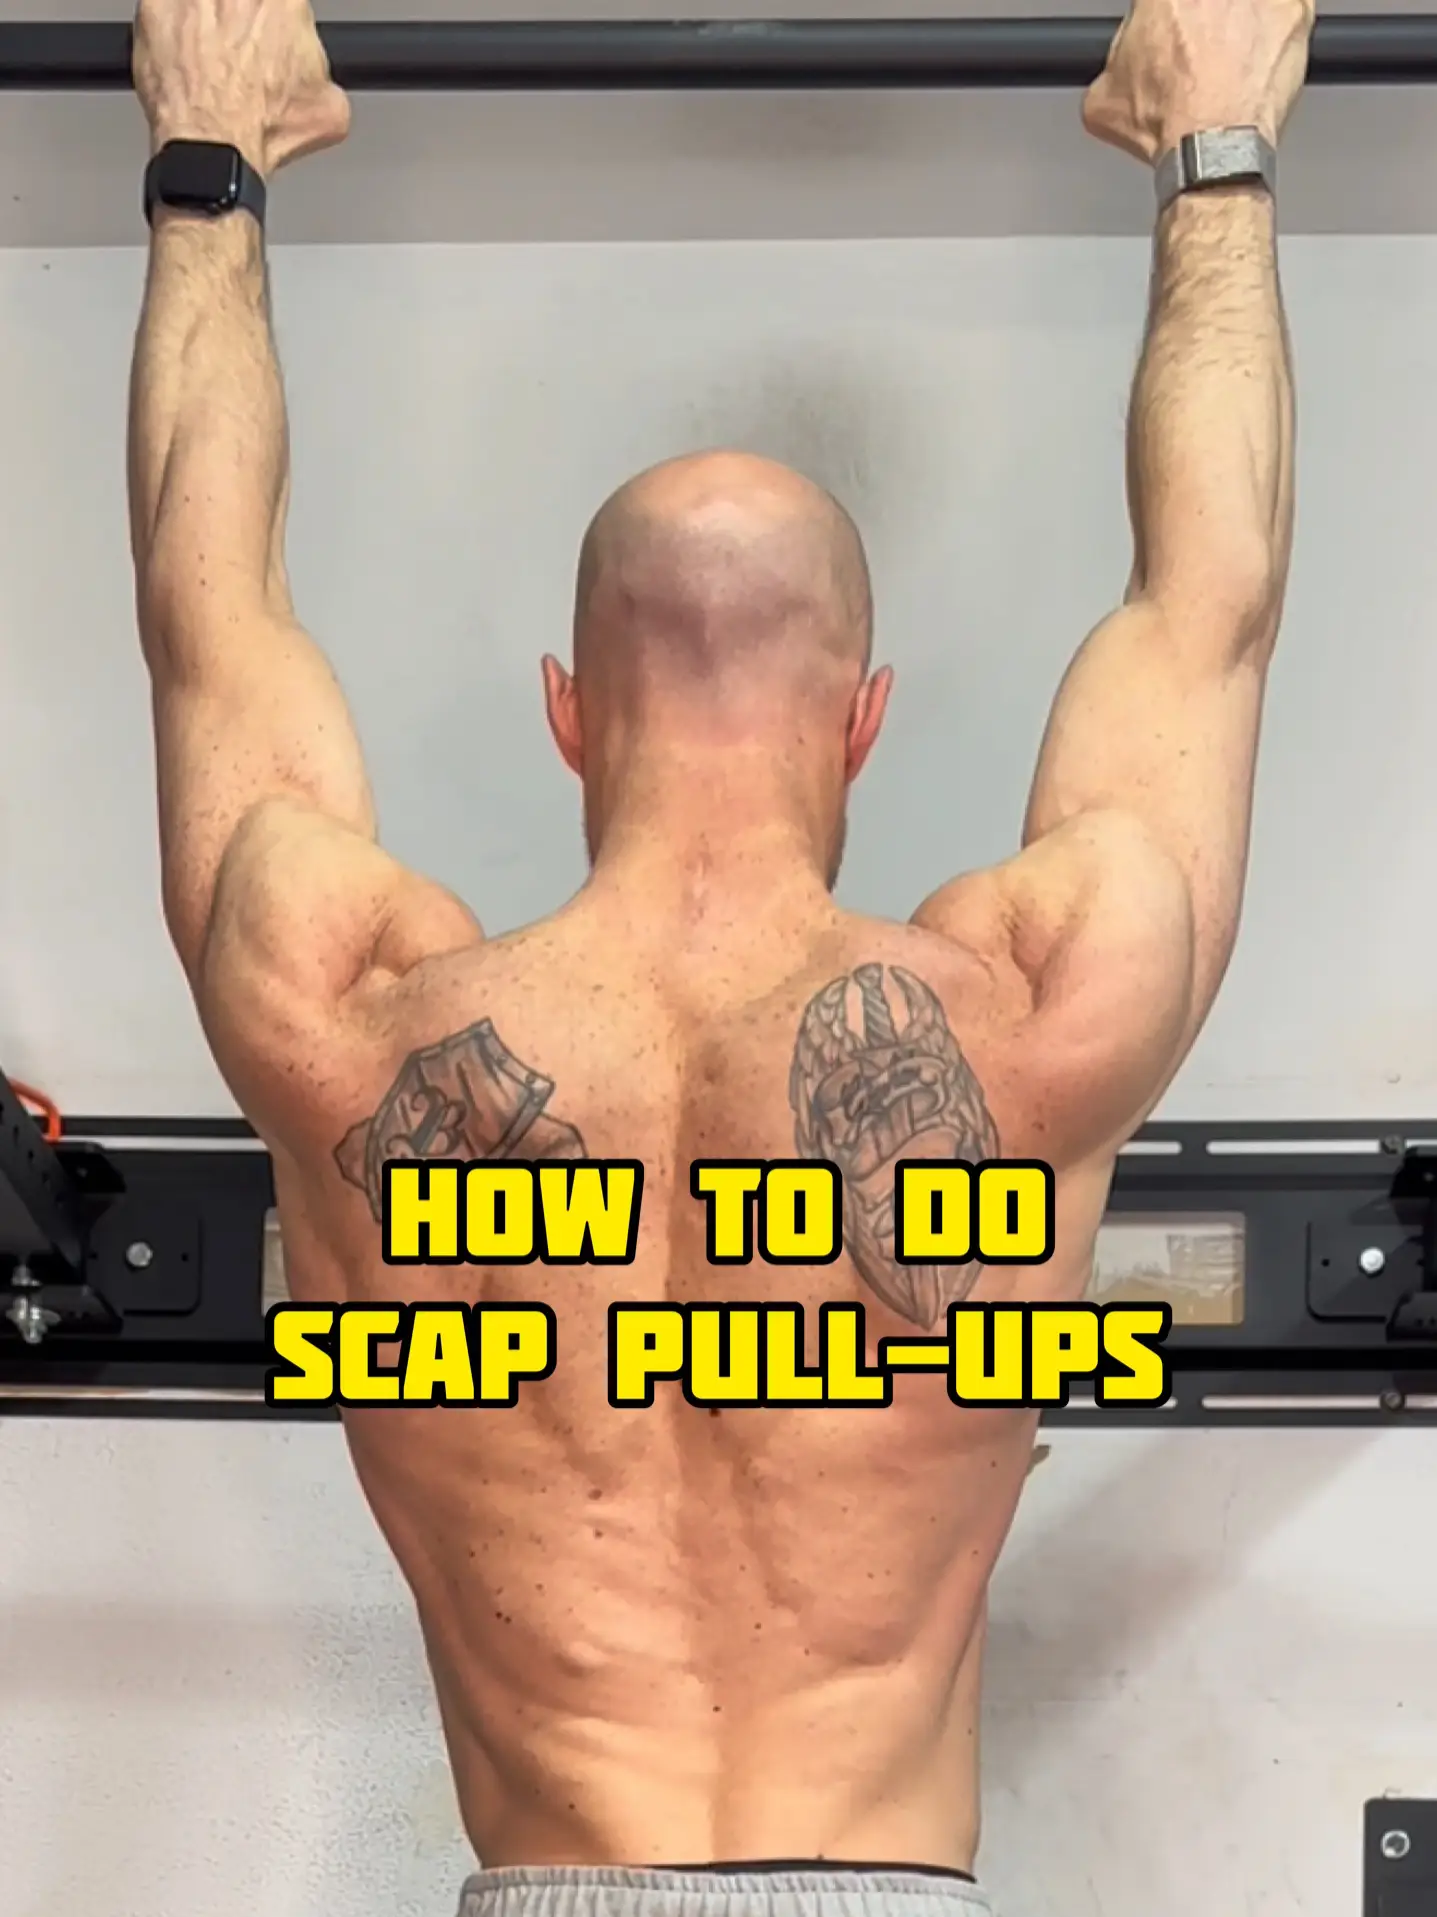 How to master the scapular pull-up